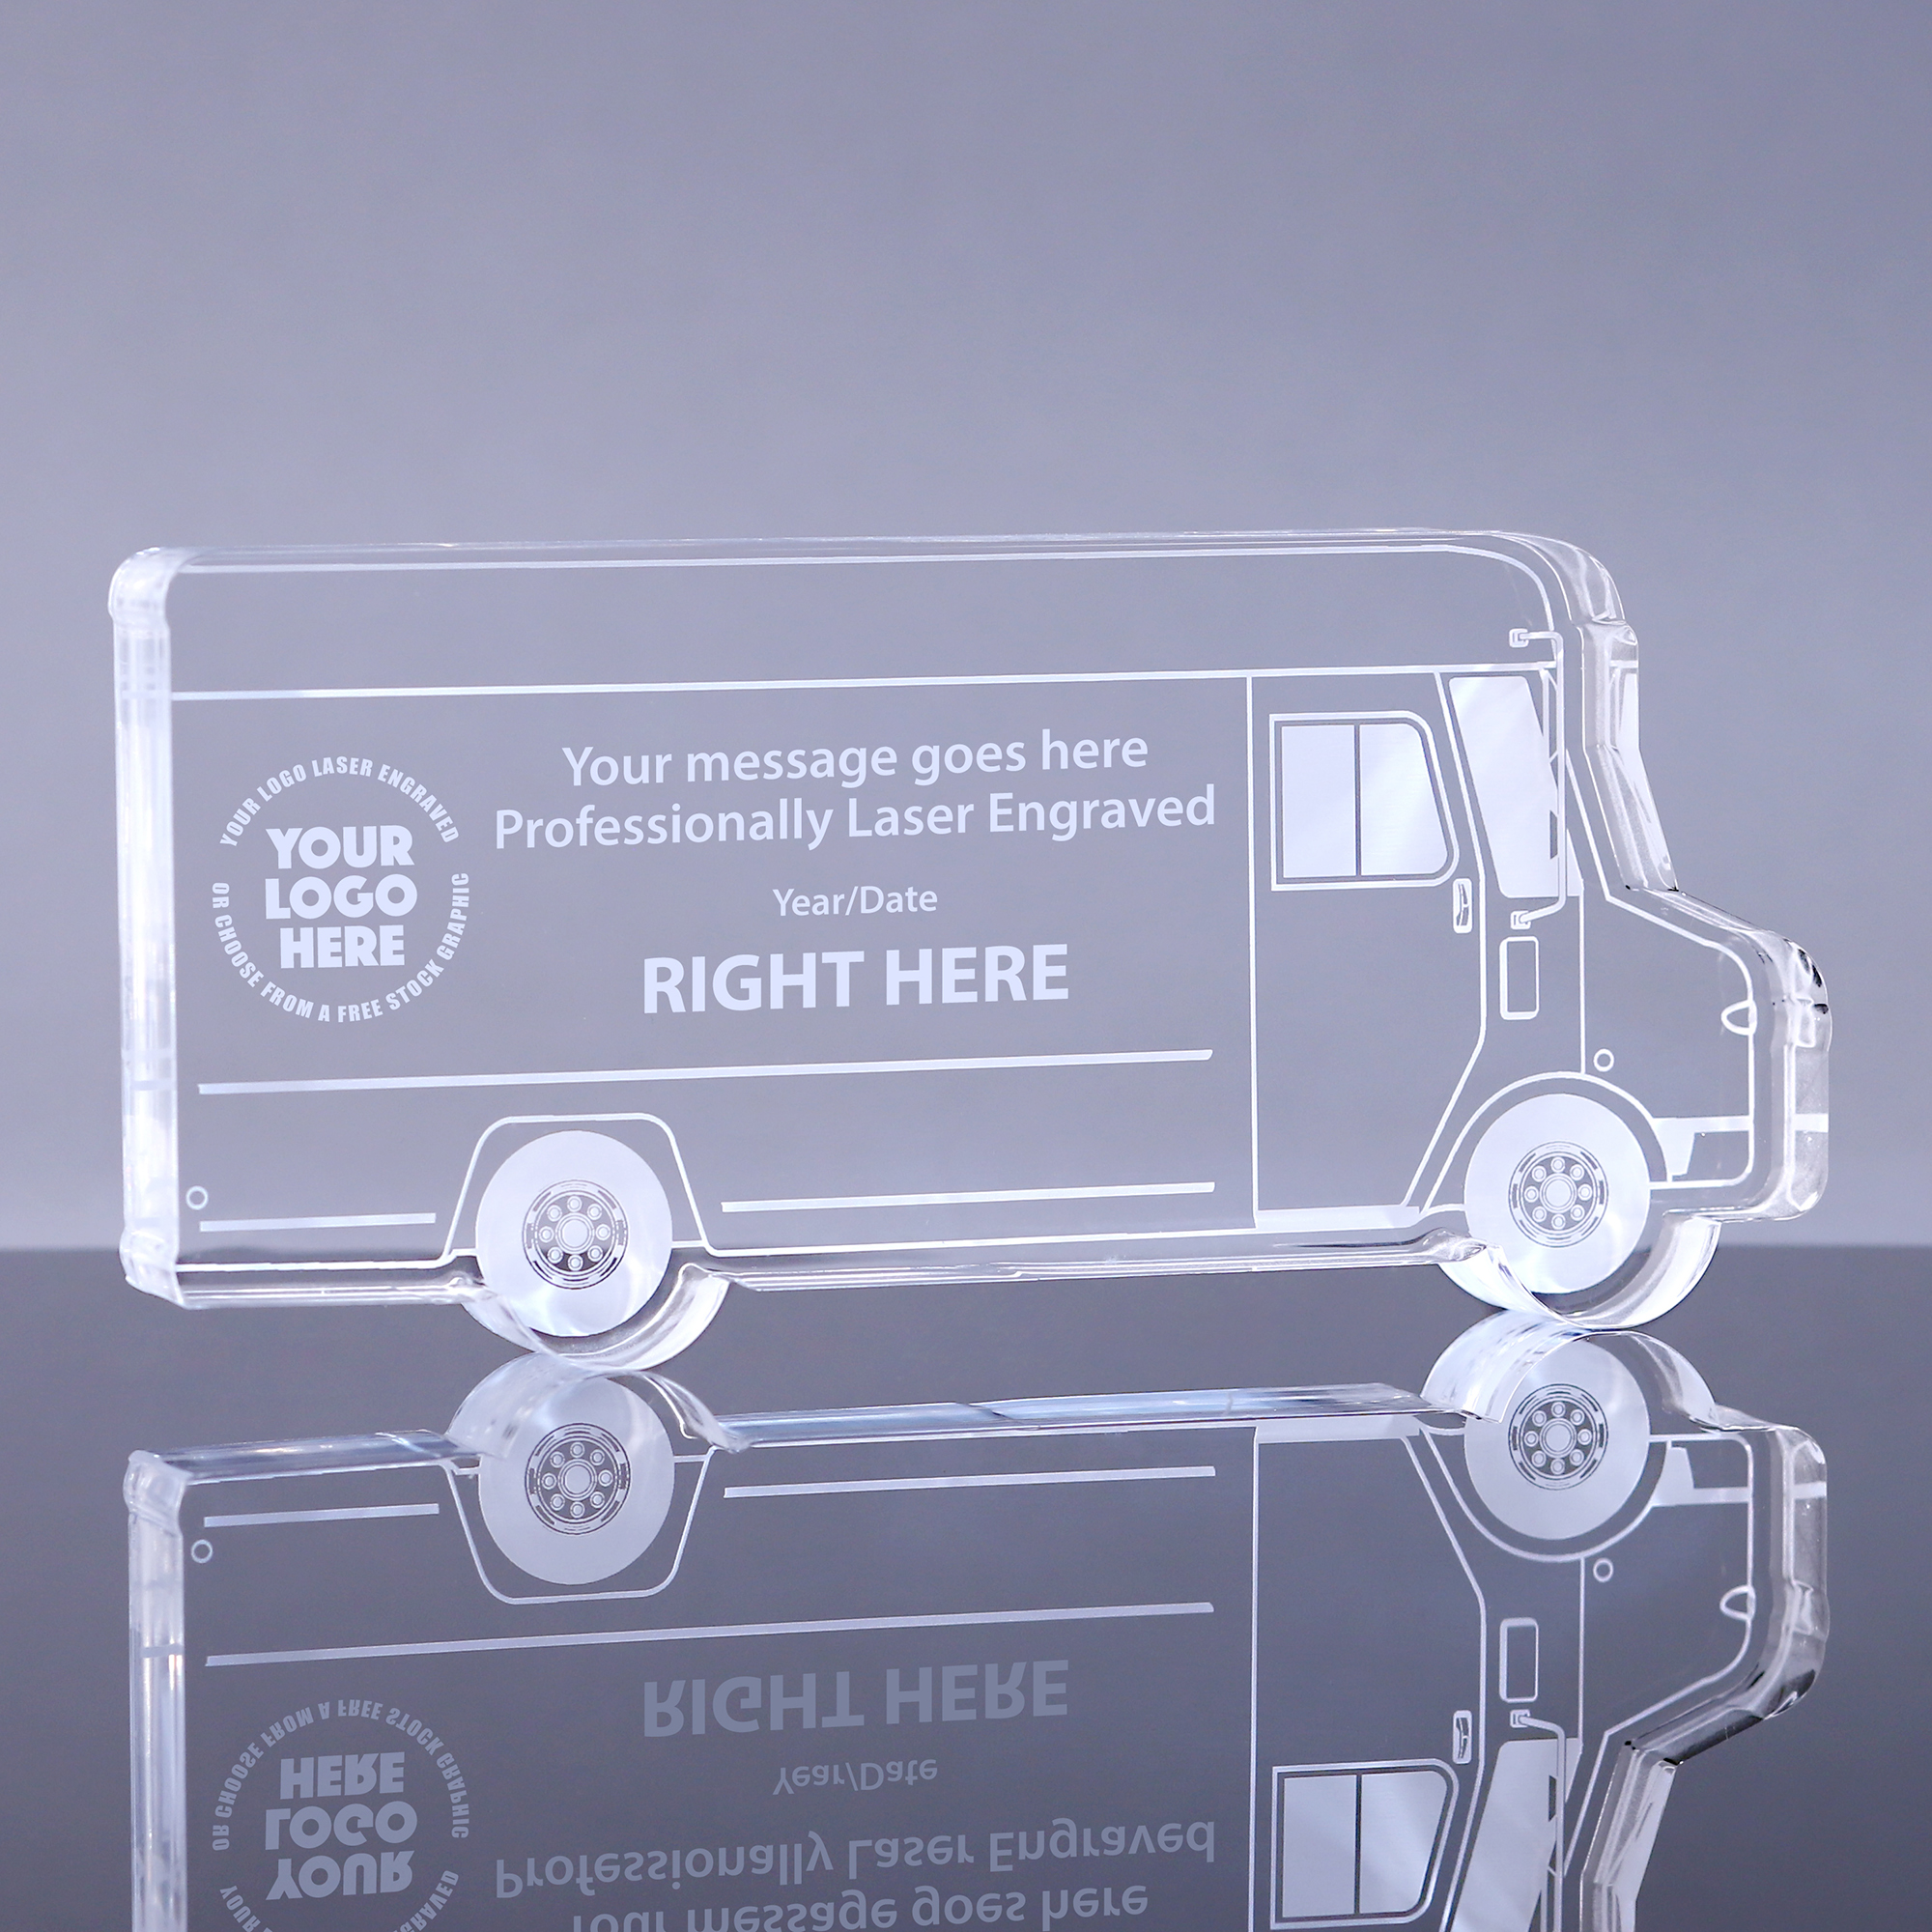 1 inch Thick Delivery Truck Acrylic Award - 6 inch